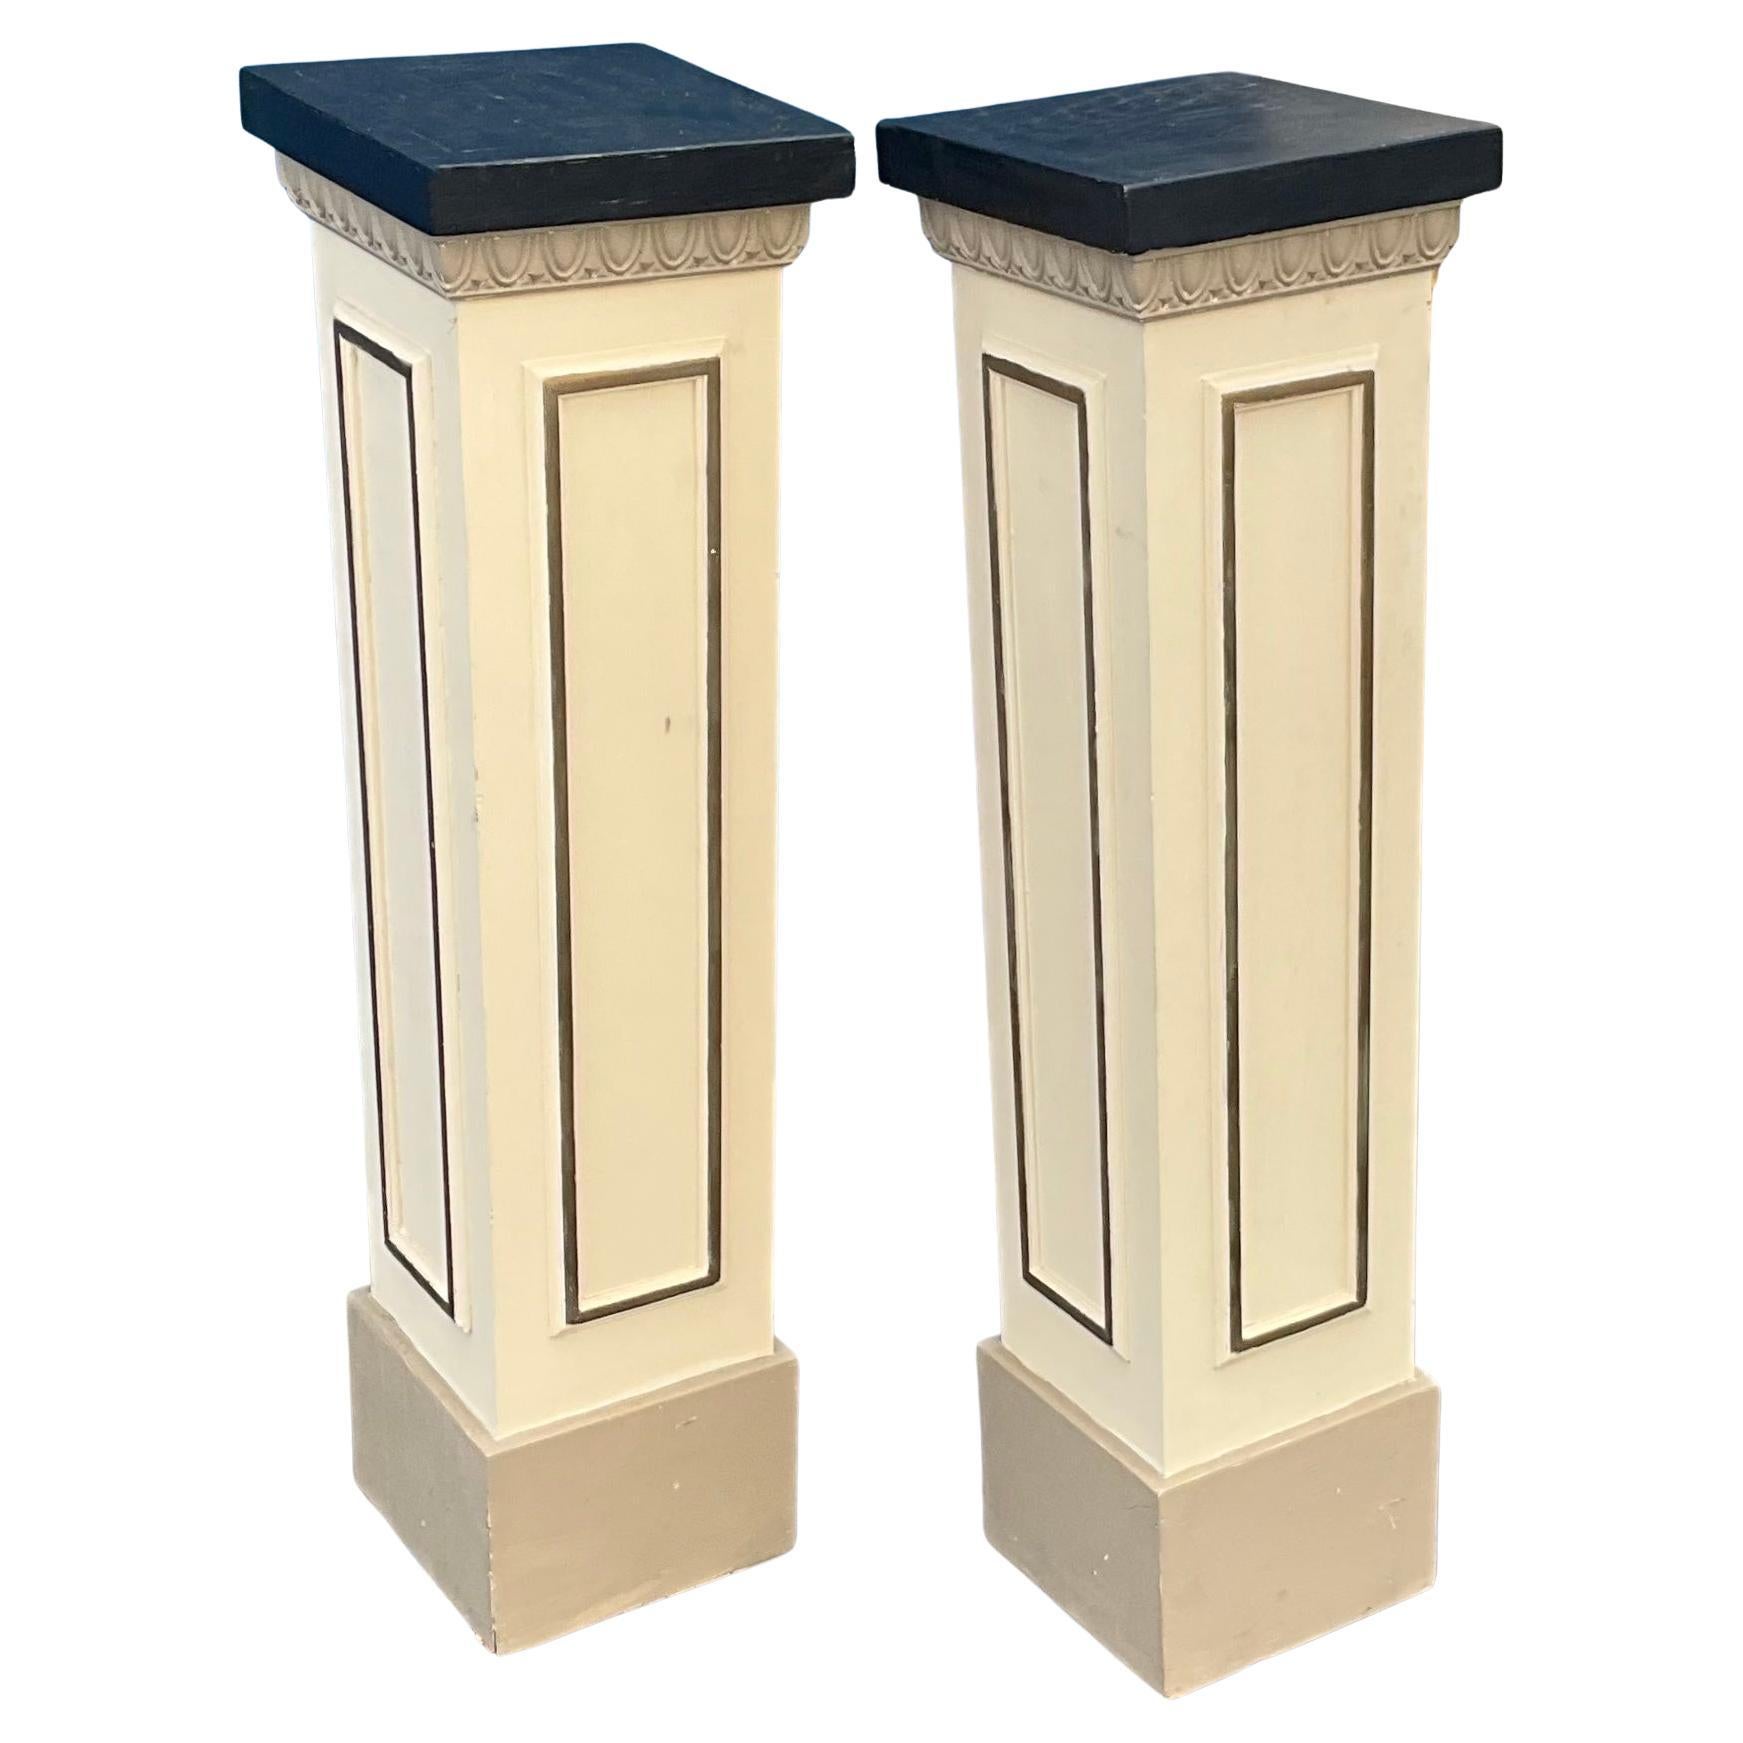 Mod-Century Italian Neo-Classical Style Painted Columns / Pedestals, Pair For Sale